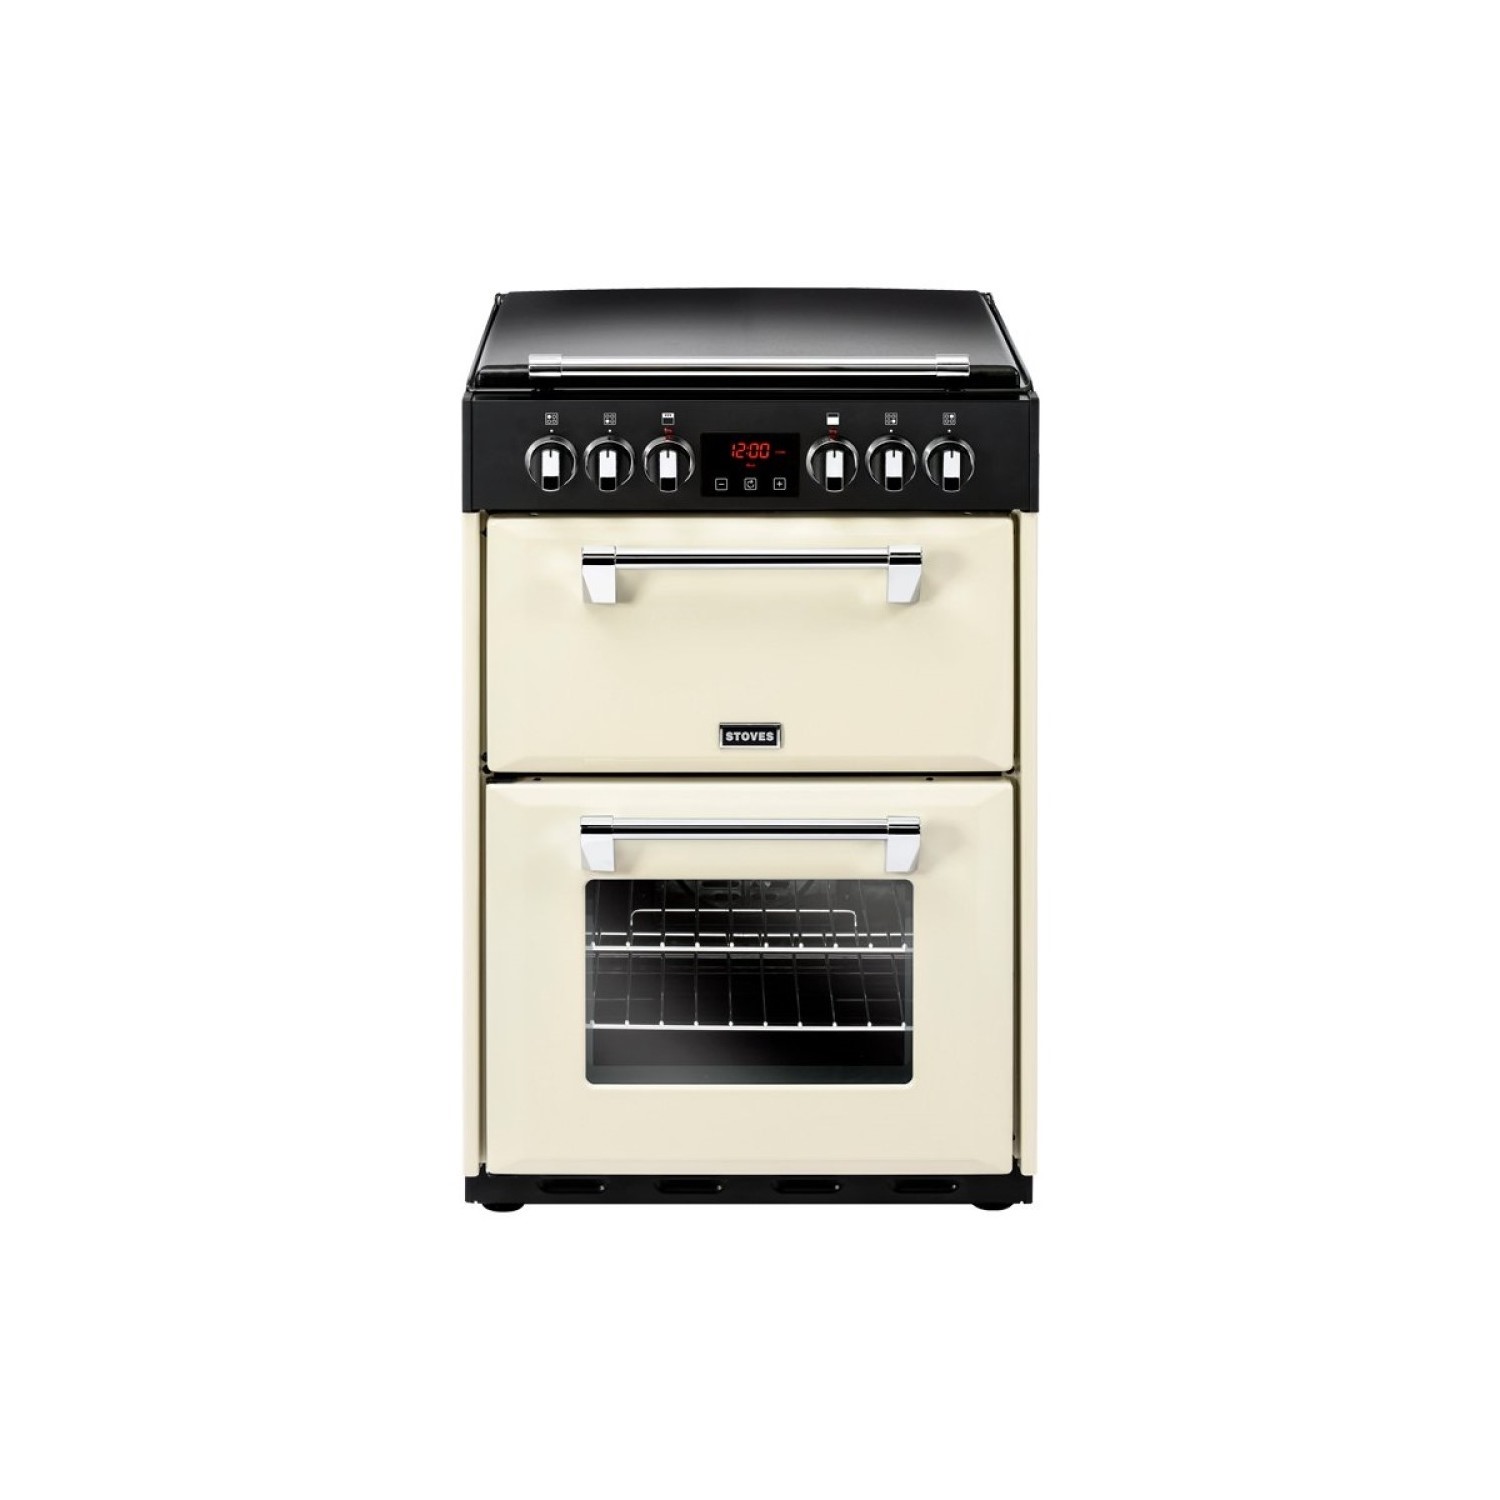 Stoves Richmond 600E 60cm Double Oven Electric Cooker with Ceramic Hob and Lid - Cream